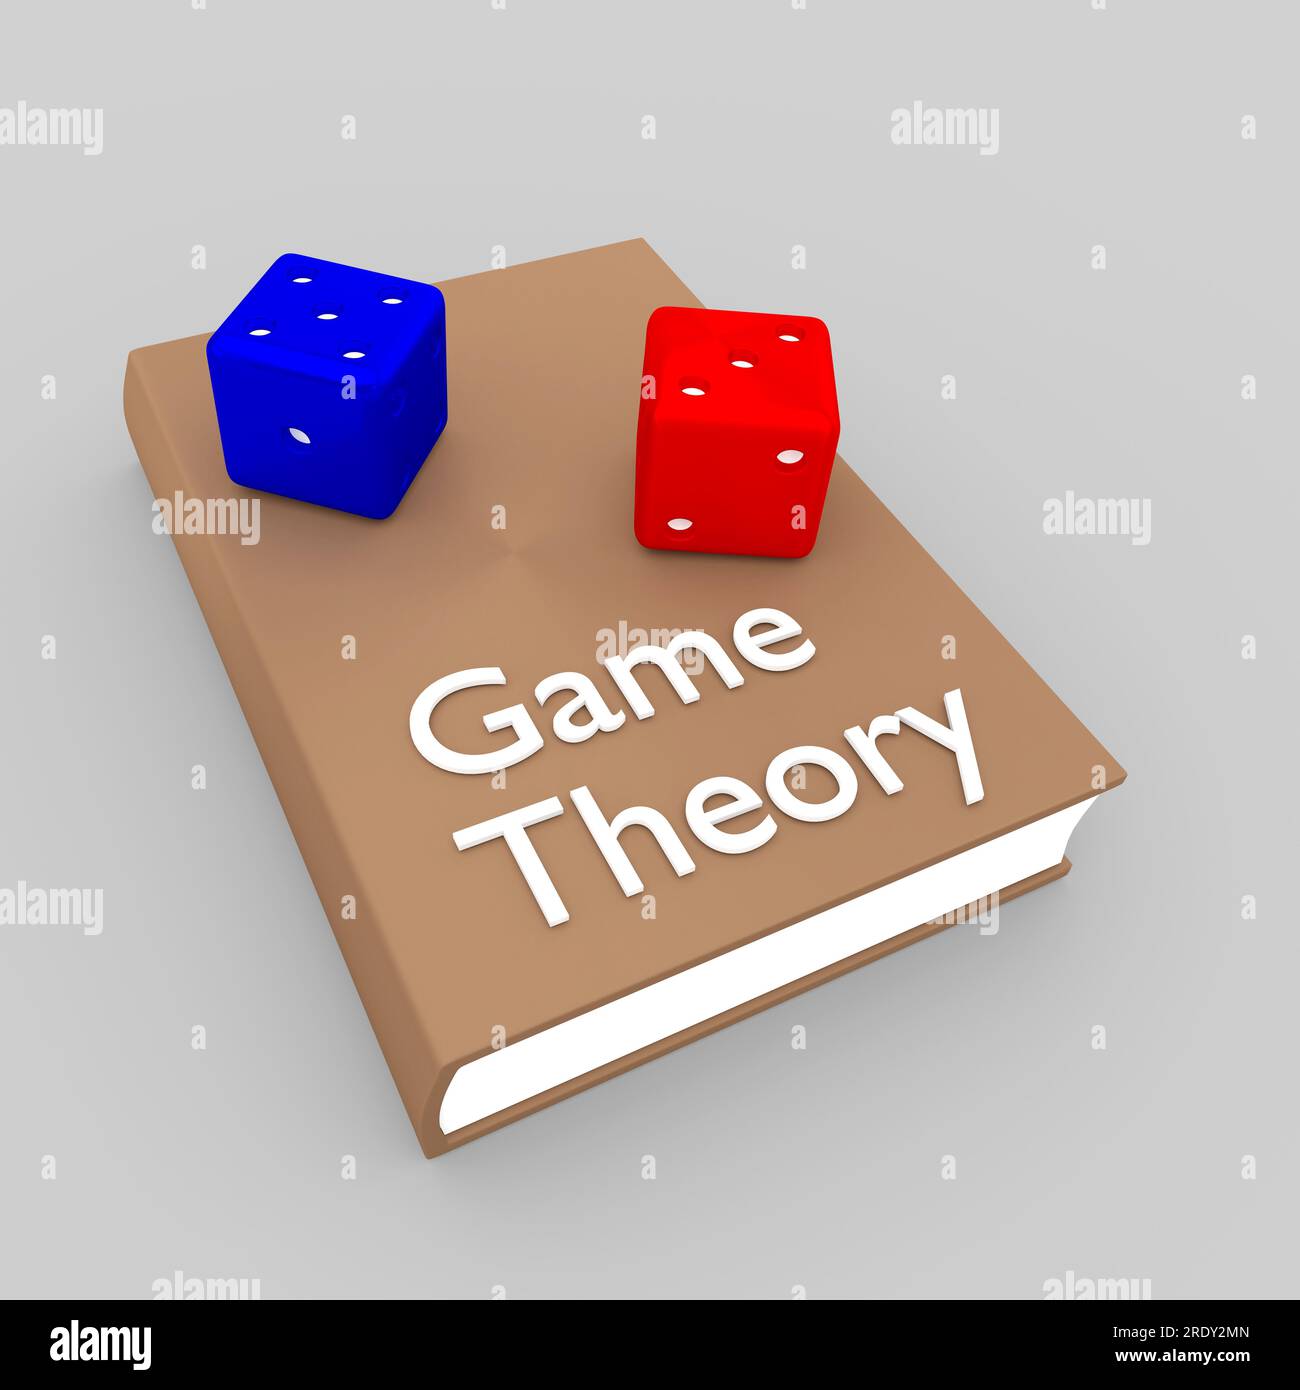 3D illustration of two dices on a book, titled as Game Theory. Stock Photo